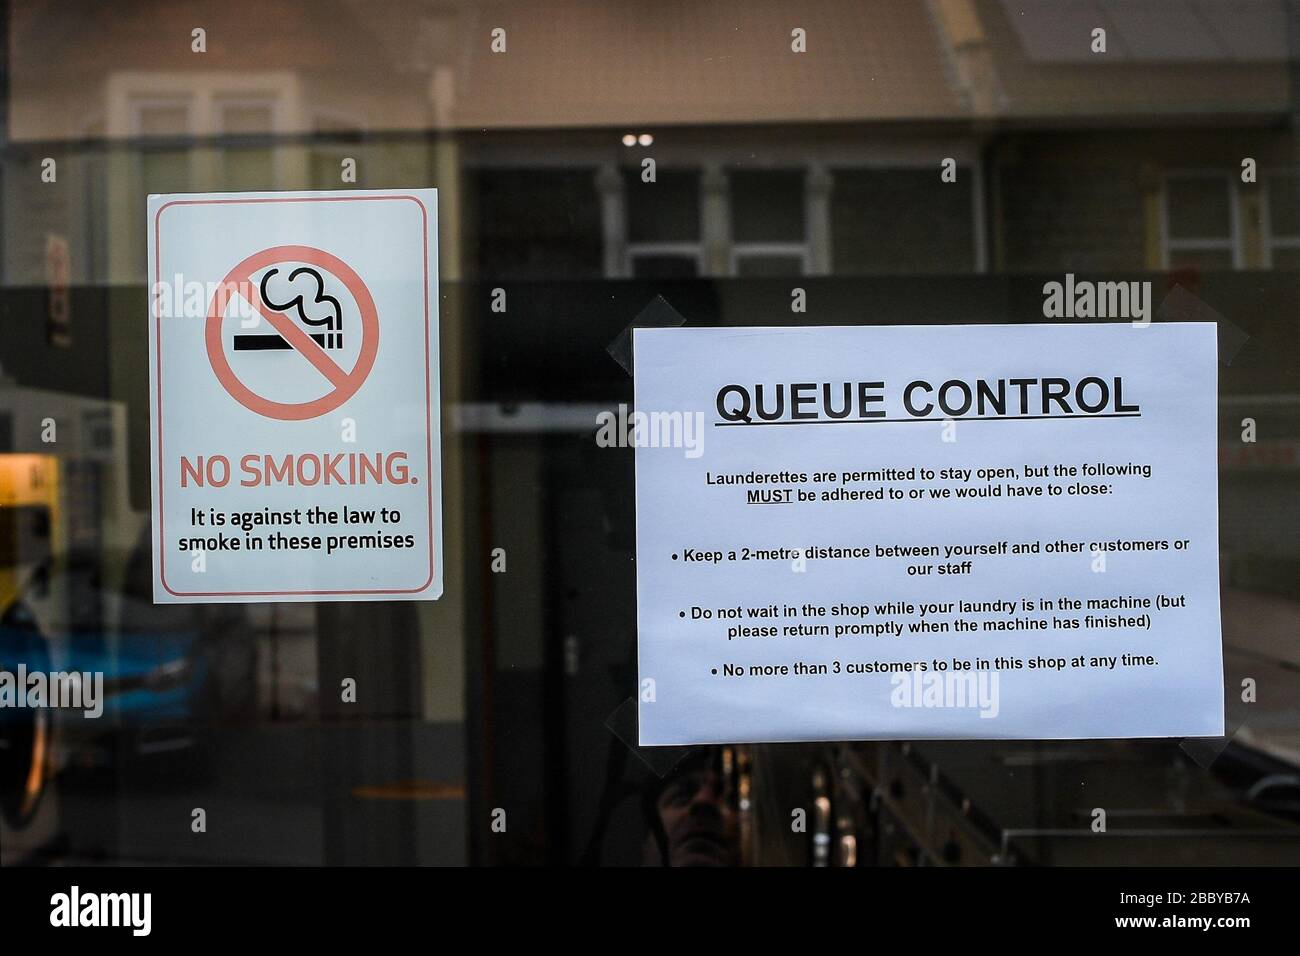 A coronavirus notice in a shop doorway in Bristol as the UK continues in lockdown to help curb the spread of the coronavirus. Stock Photo